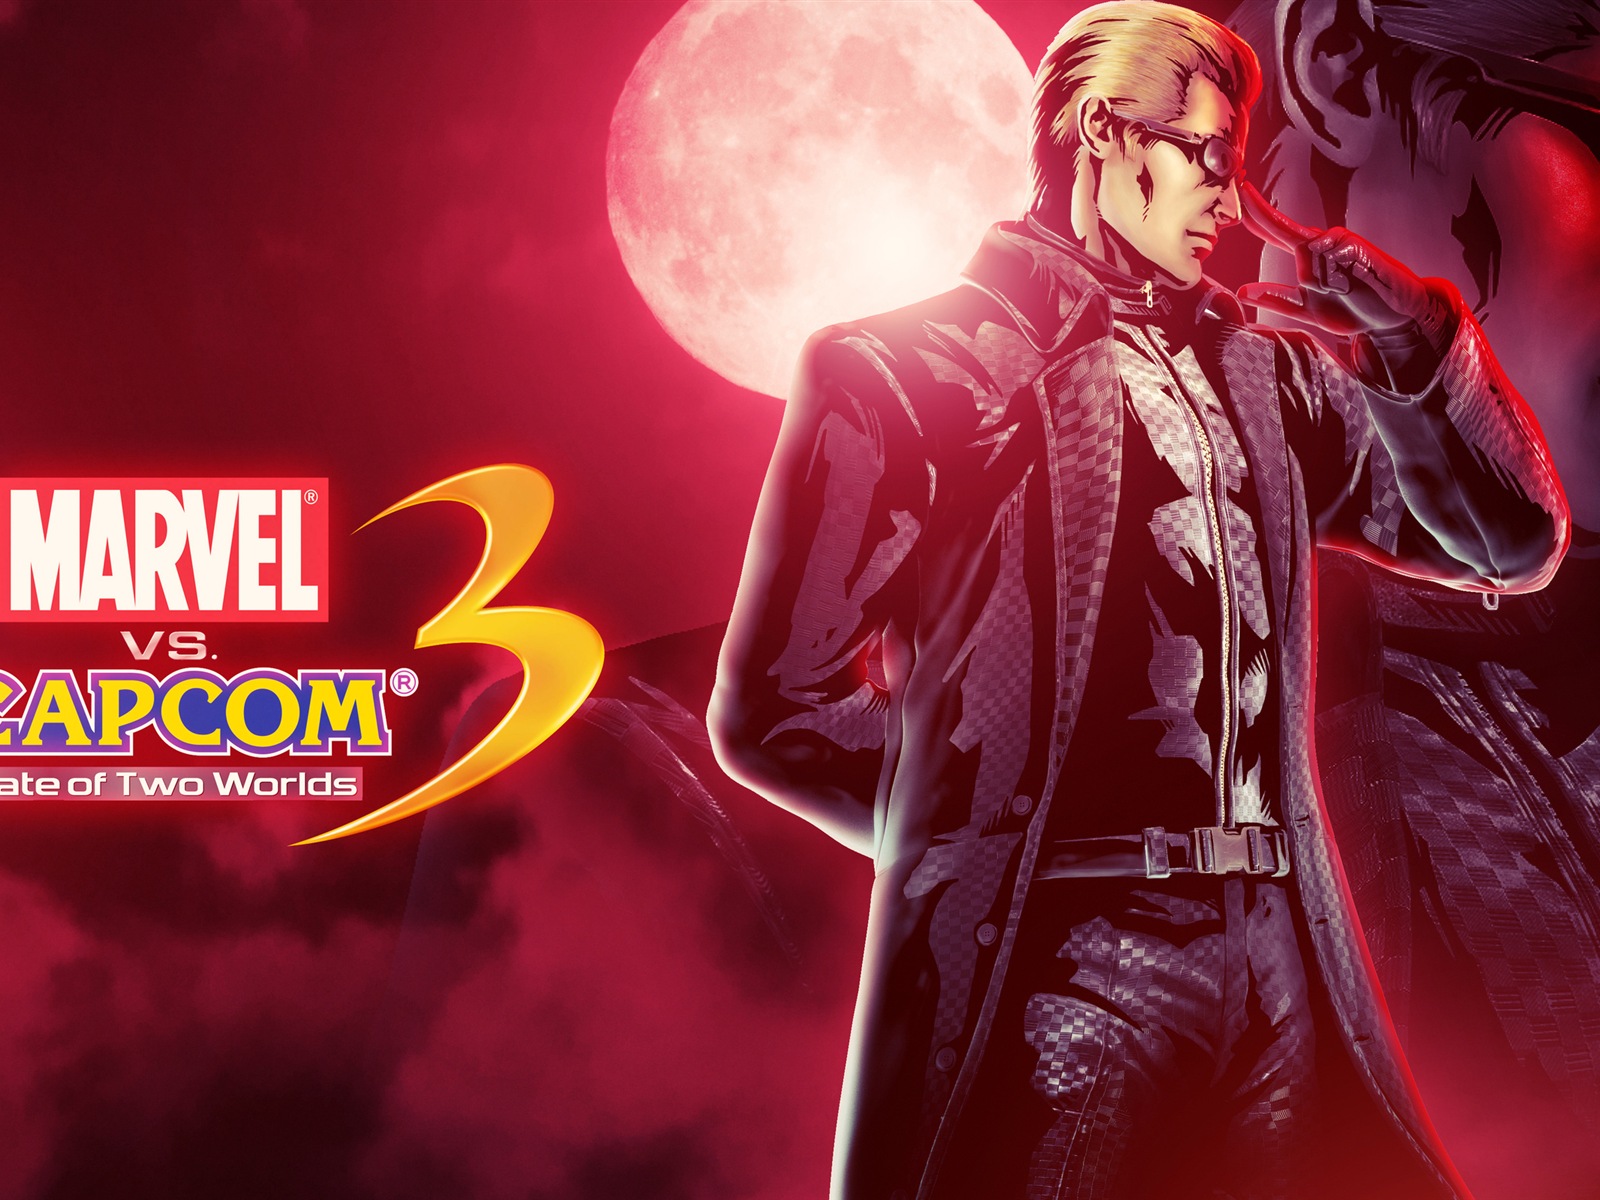 Marvel VS. Capcom 3: Fate of Two Worlds HD game wallpapers #9 - 1600x1200